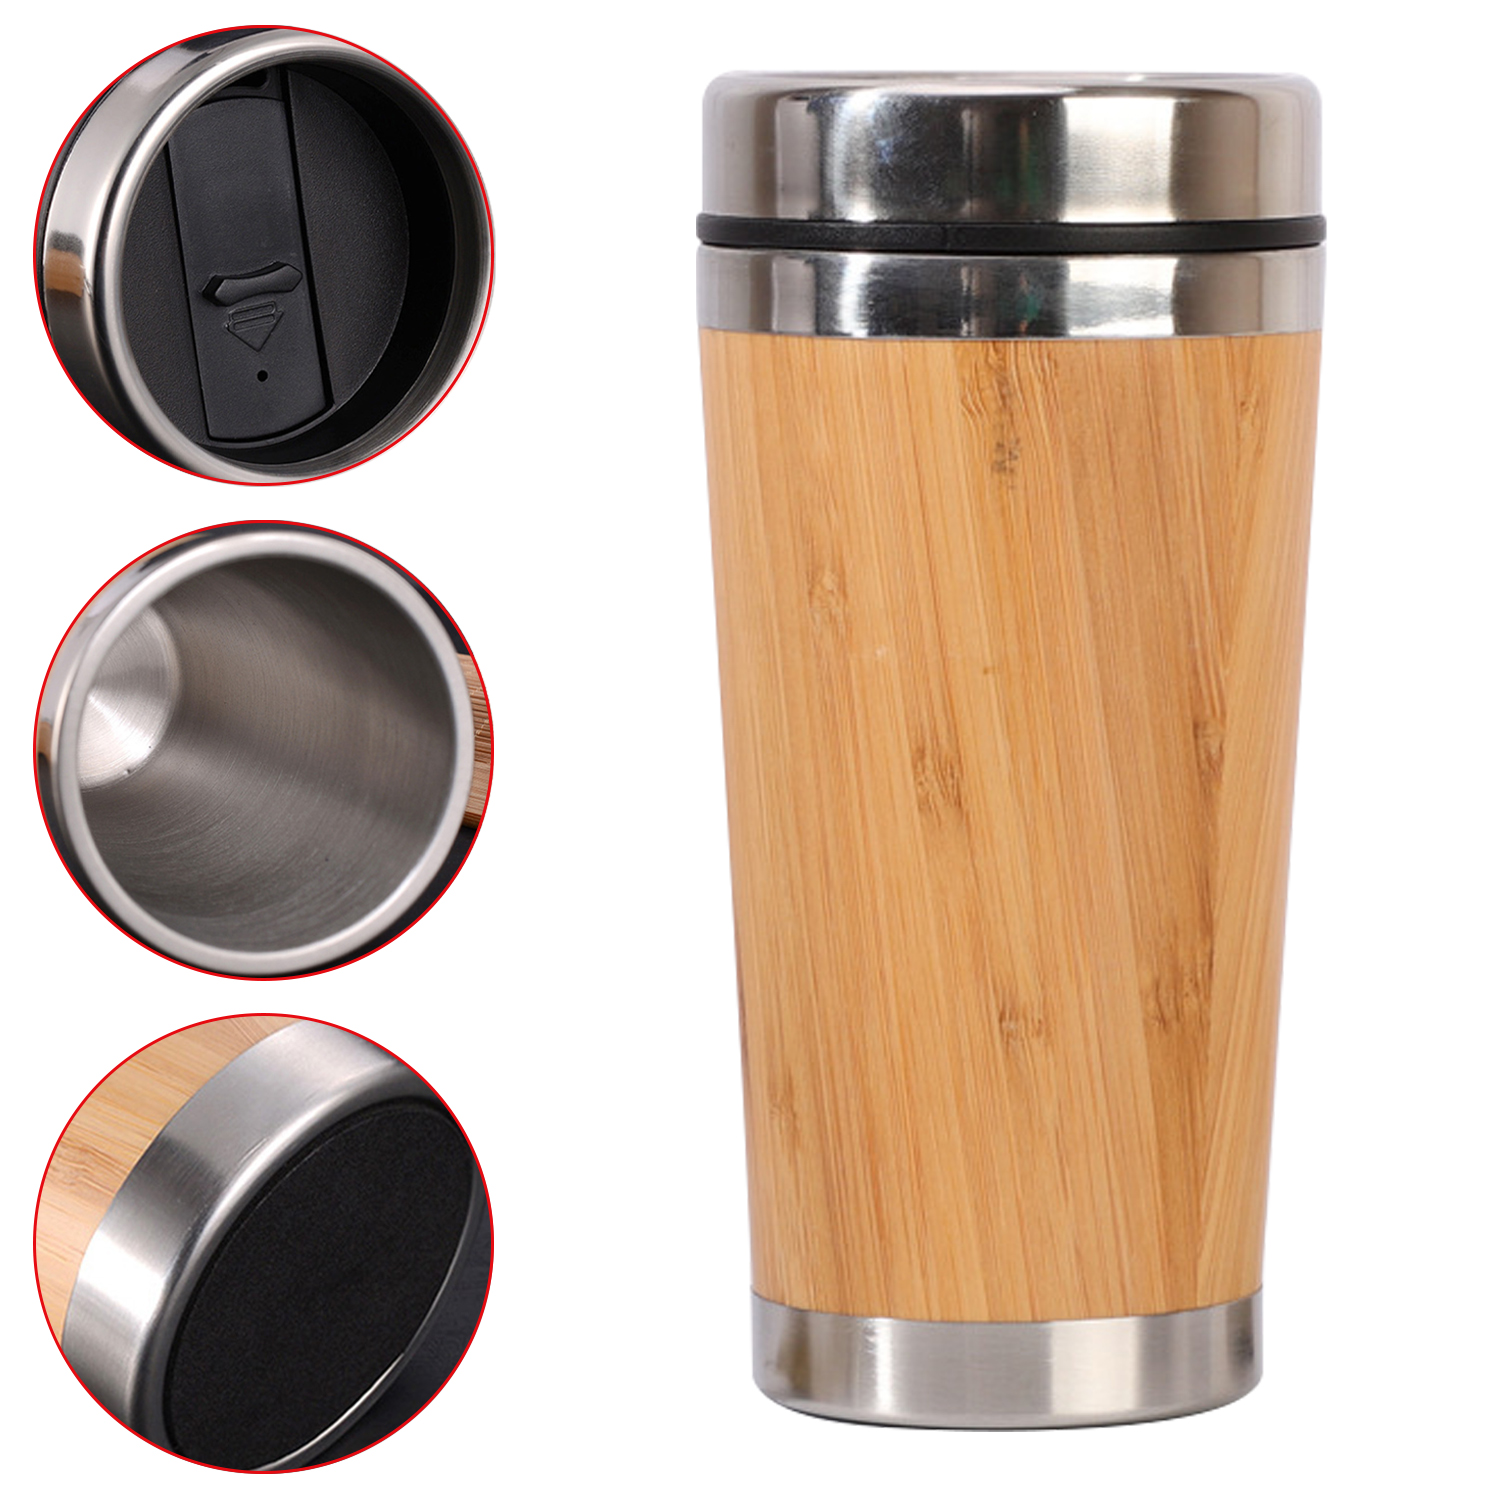 450ml Double Wall Stainless Steel Bamboo Shell Coffee Mug For Travel & Office